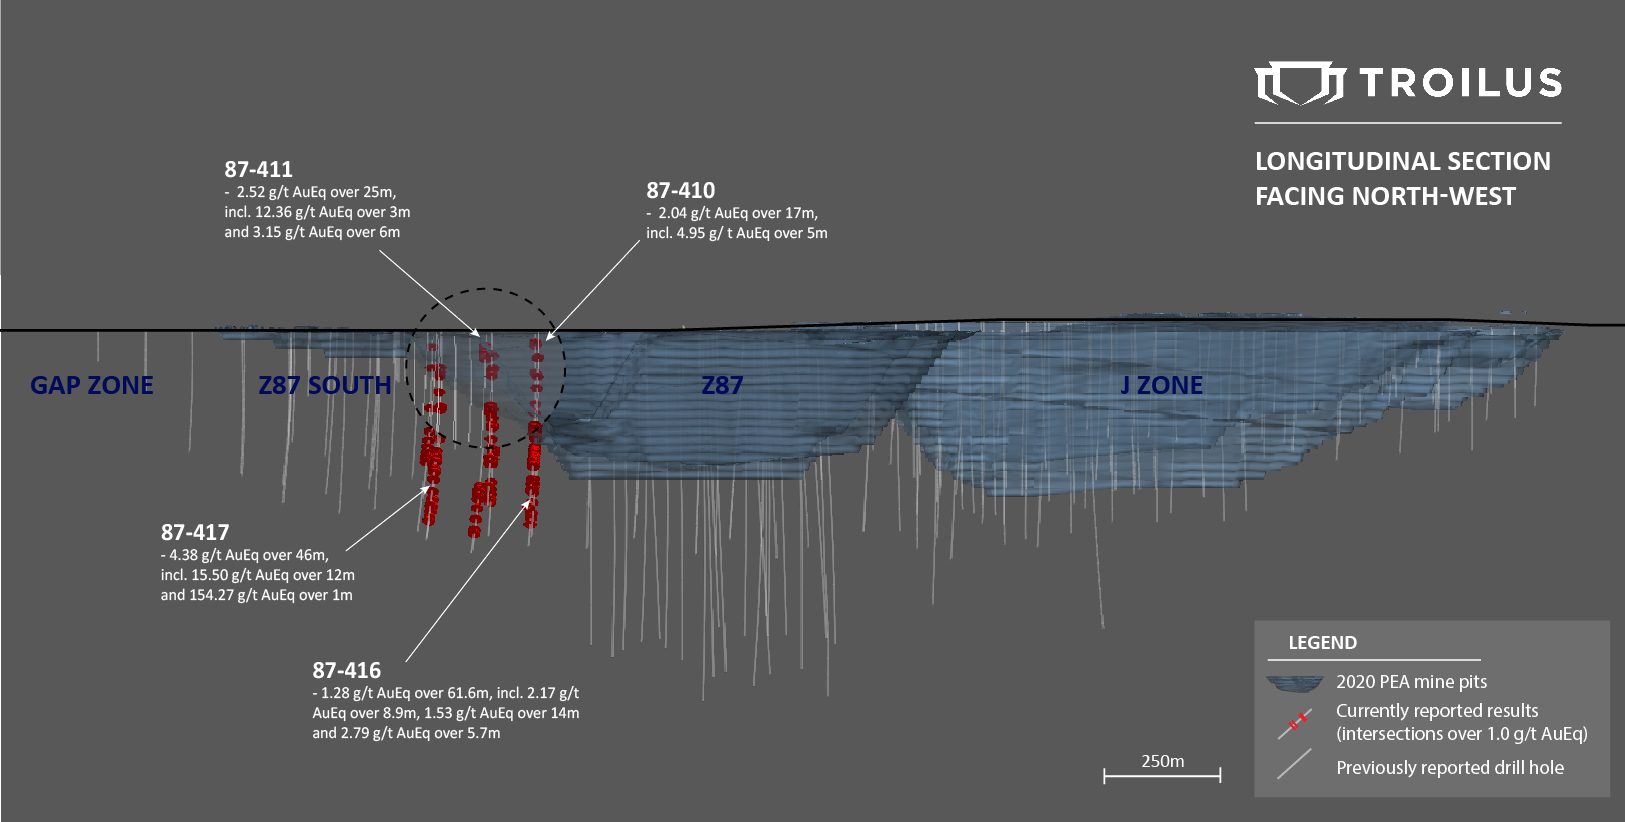 Longitudinal Section Facing North-West Showing Intercepts above 1.0 g/t AuEq on Currently Reported Drill Holes